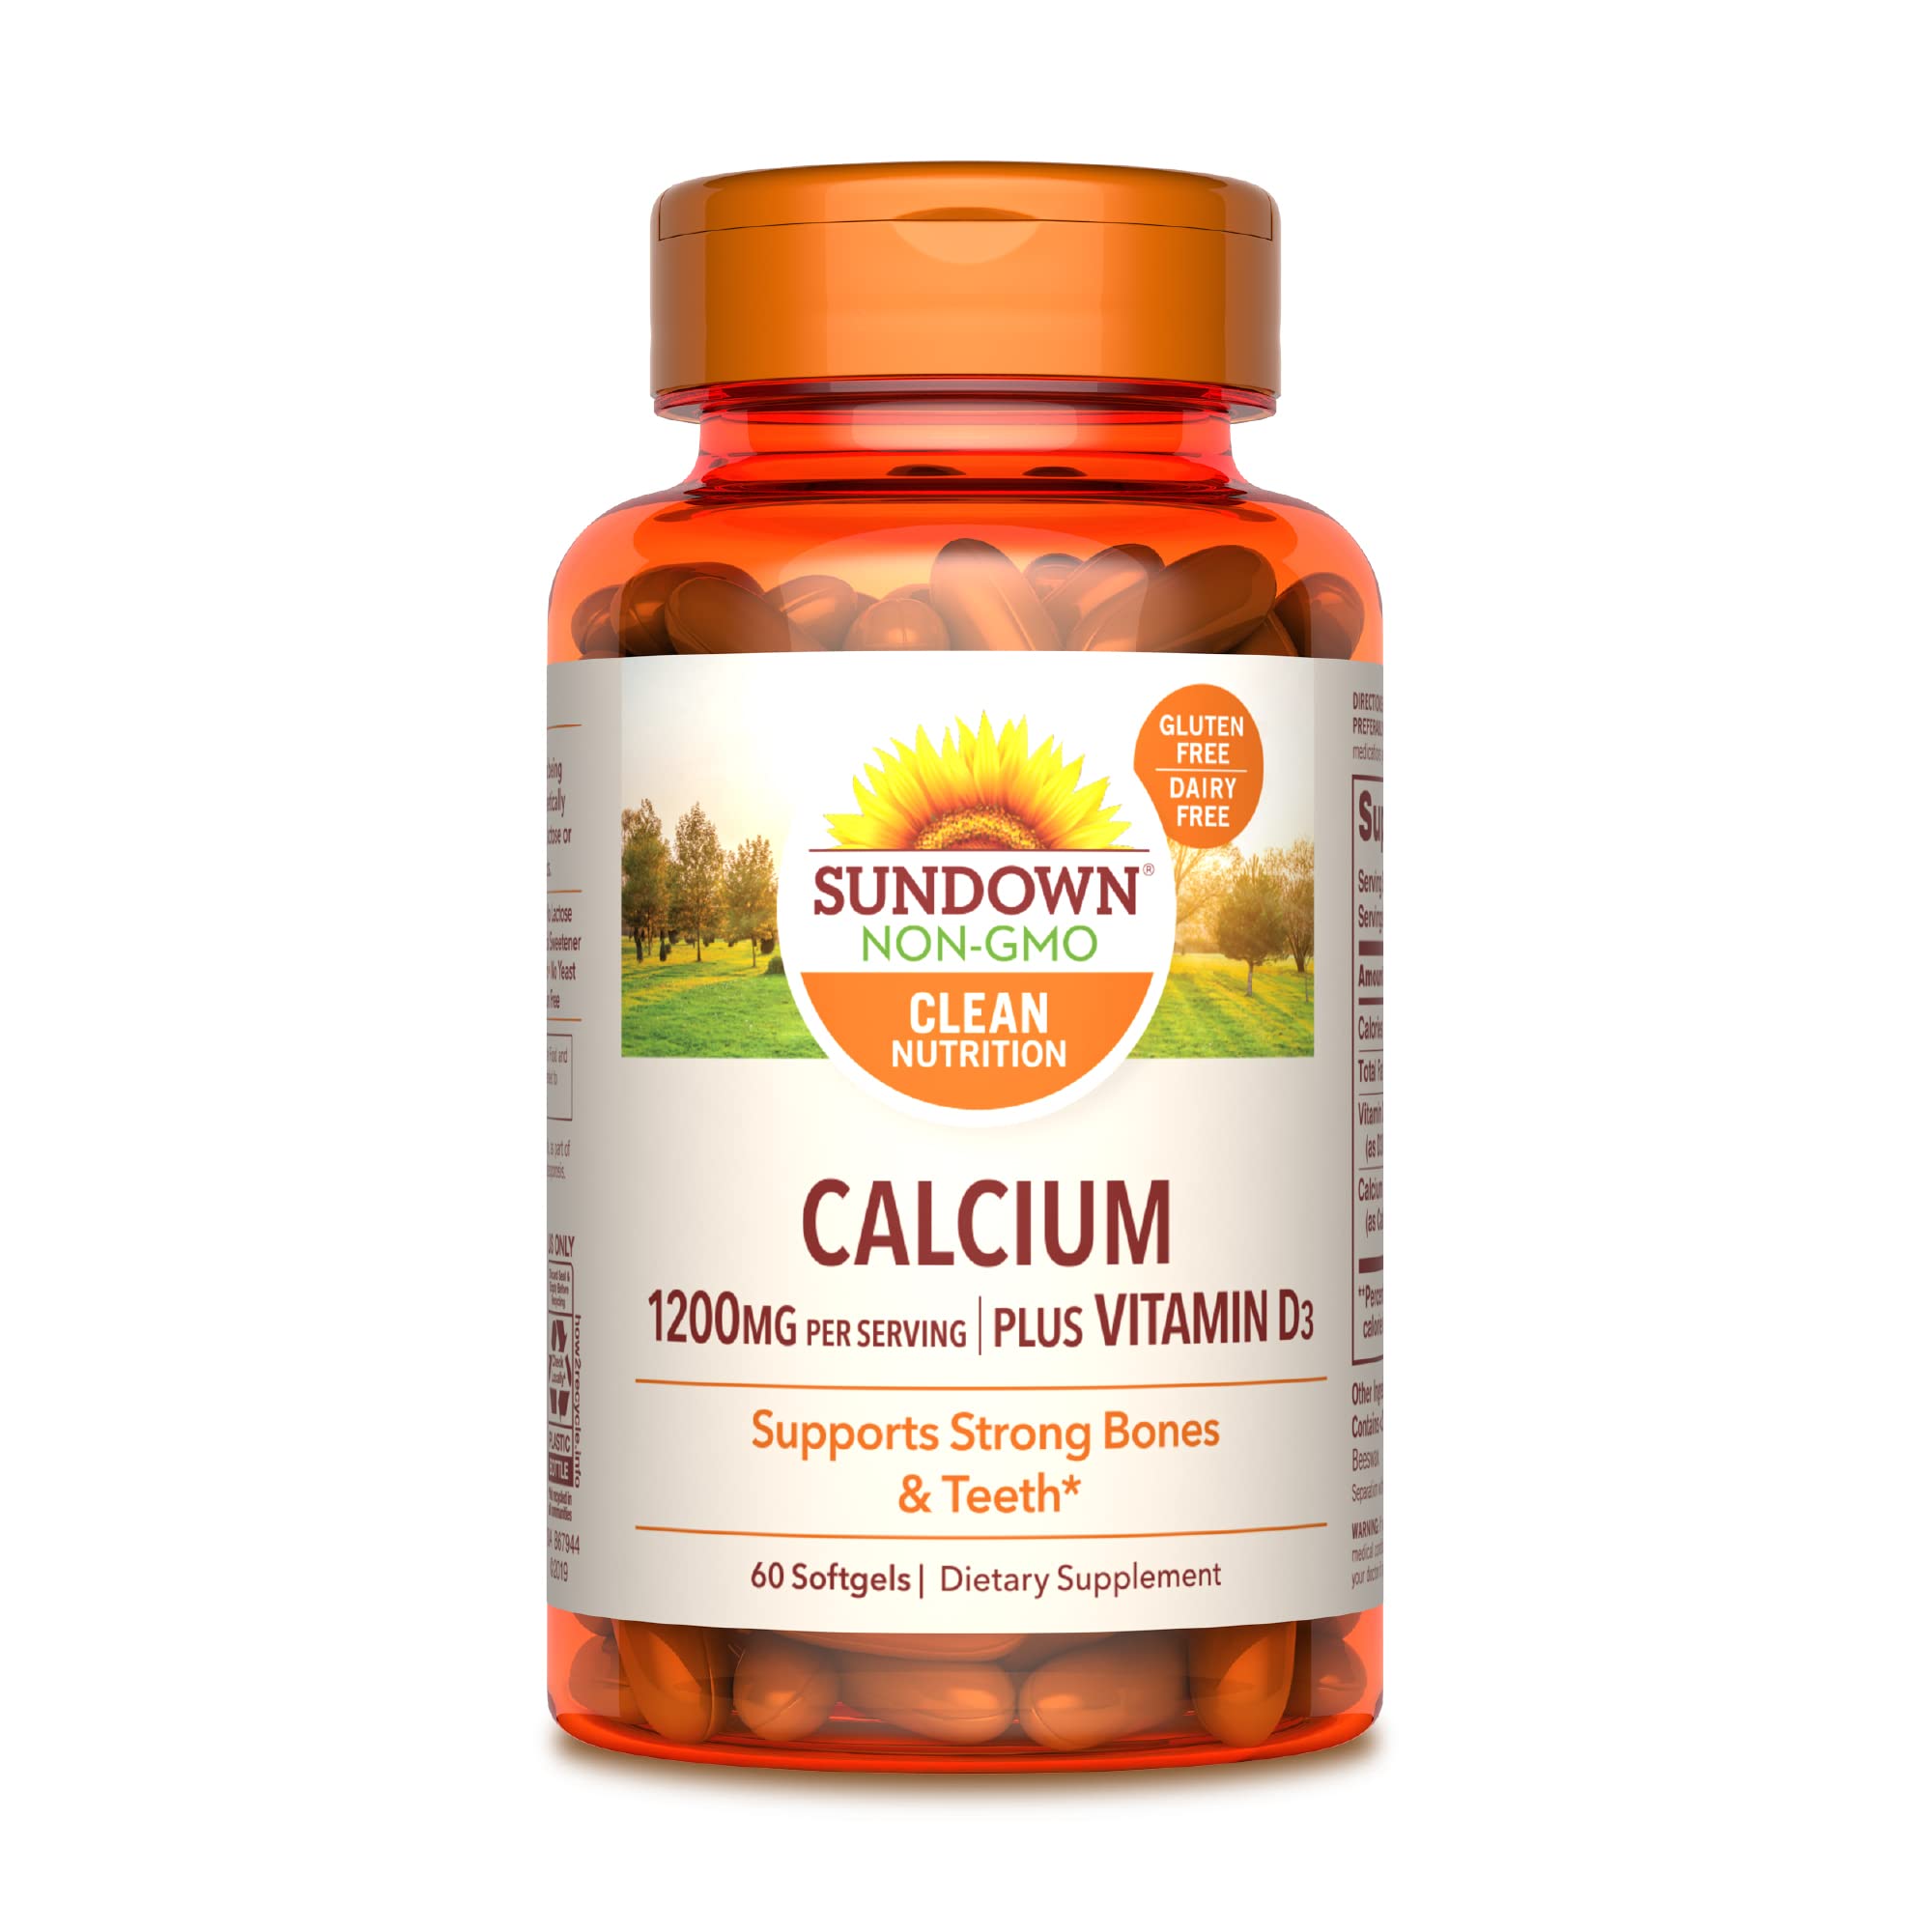 Sundown Calcium 1200mg with Vitamin D3 25mcg Softgels for Immune Support, Non-GMO Dairy-Free, Gluten-Free, unflavored, 60 Count